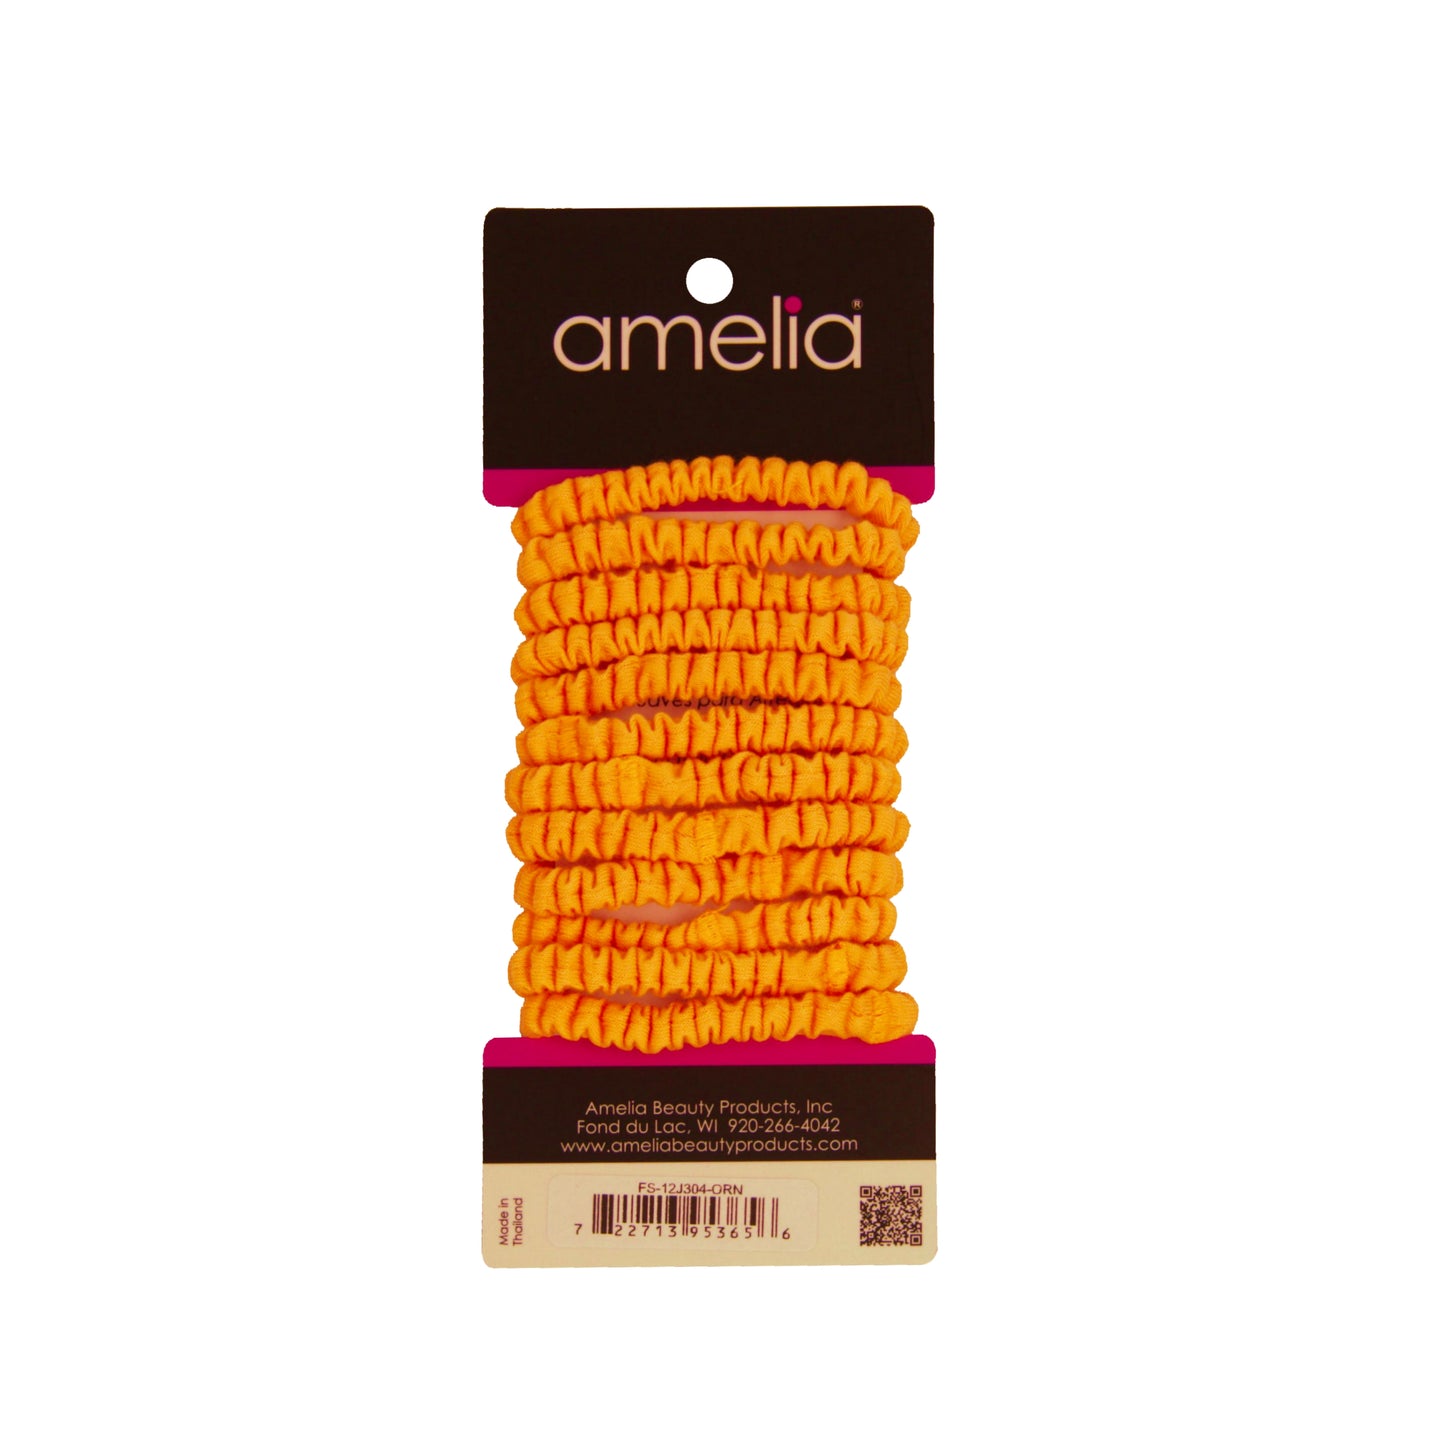 Amelia Beauty, Neon Orange Skinny Jersey Scrunchies, 2.125in Diameter, Gentle on Hair, Strong Hold, No Snag, No Dents or Creases. 12 Pack